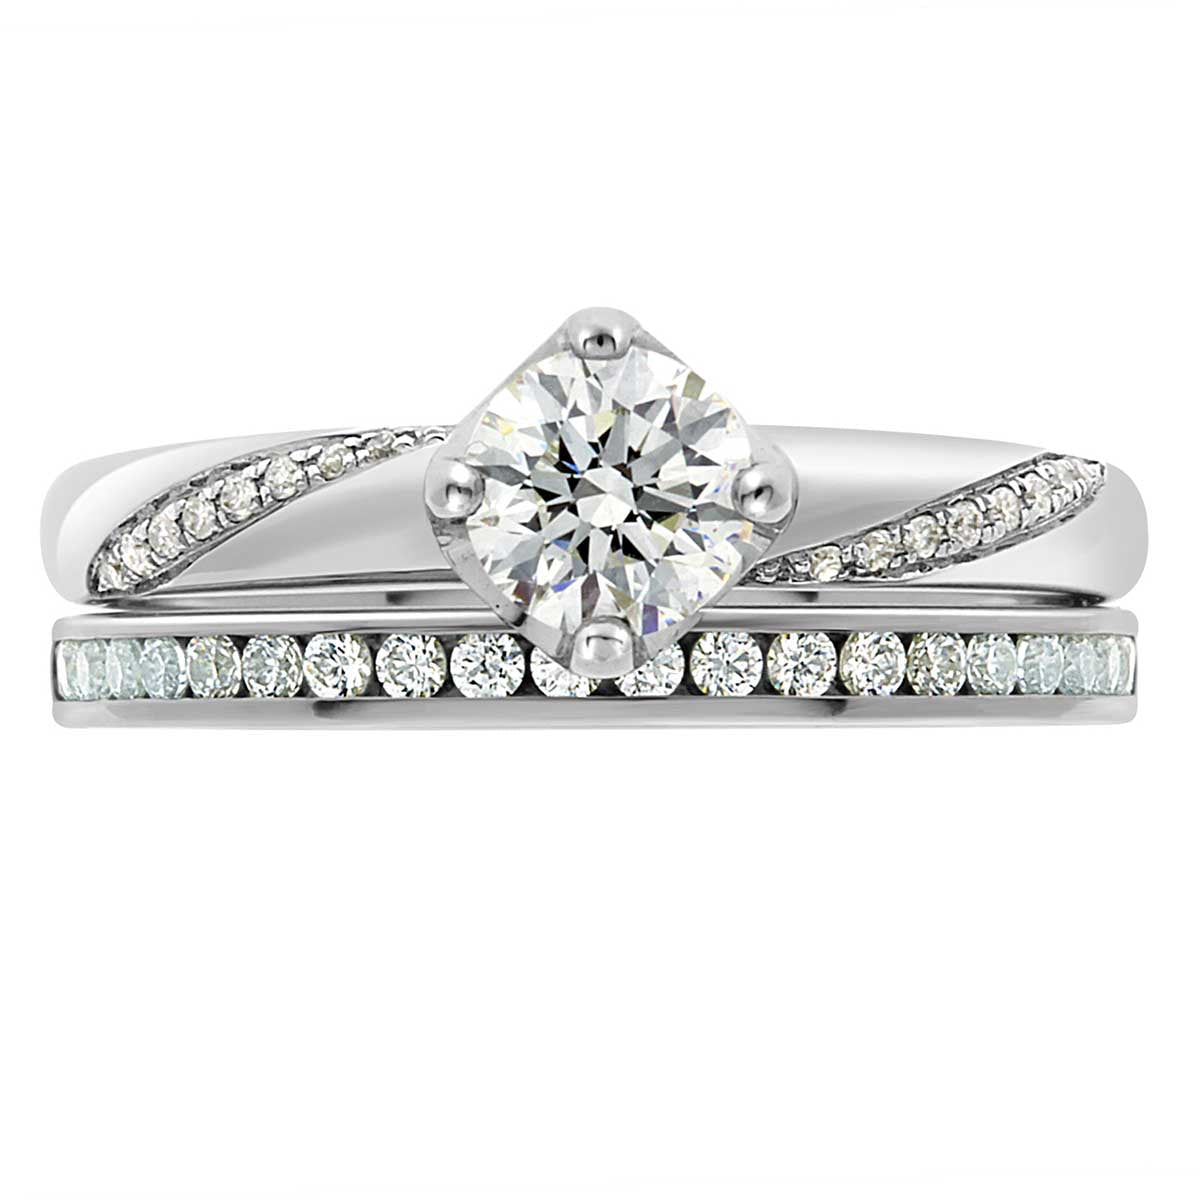 Crossover Band Engagement Ring made from white gold pictured with a diamond wedding ring